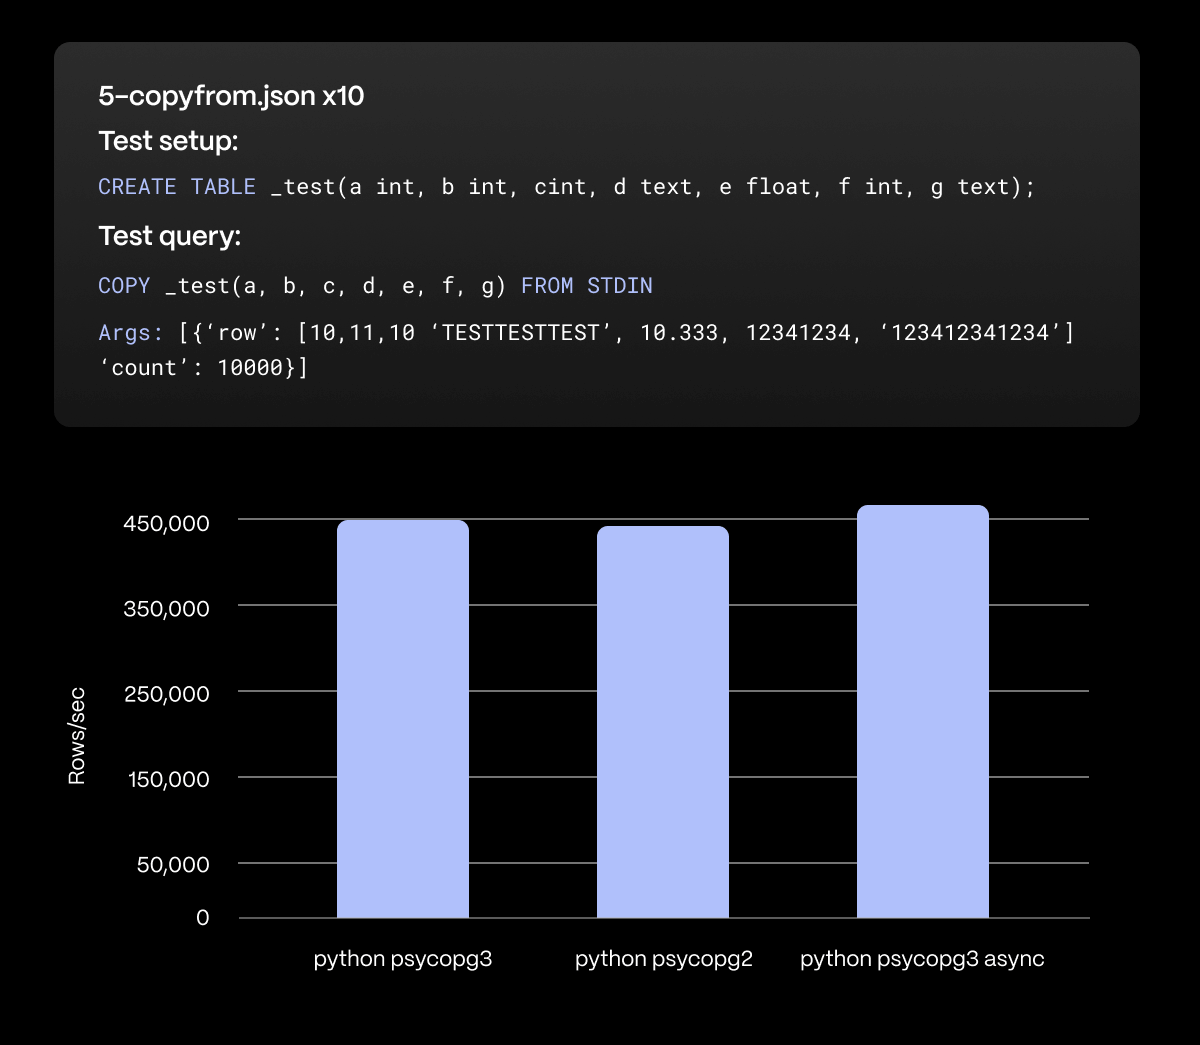 A bar chart comparing the performance of psycopg3 vs psycopg2 vs psycopg3 async for a copyfrom. psycopg3 performs slightly better in both its versions, with async being the winner once again.